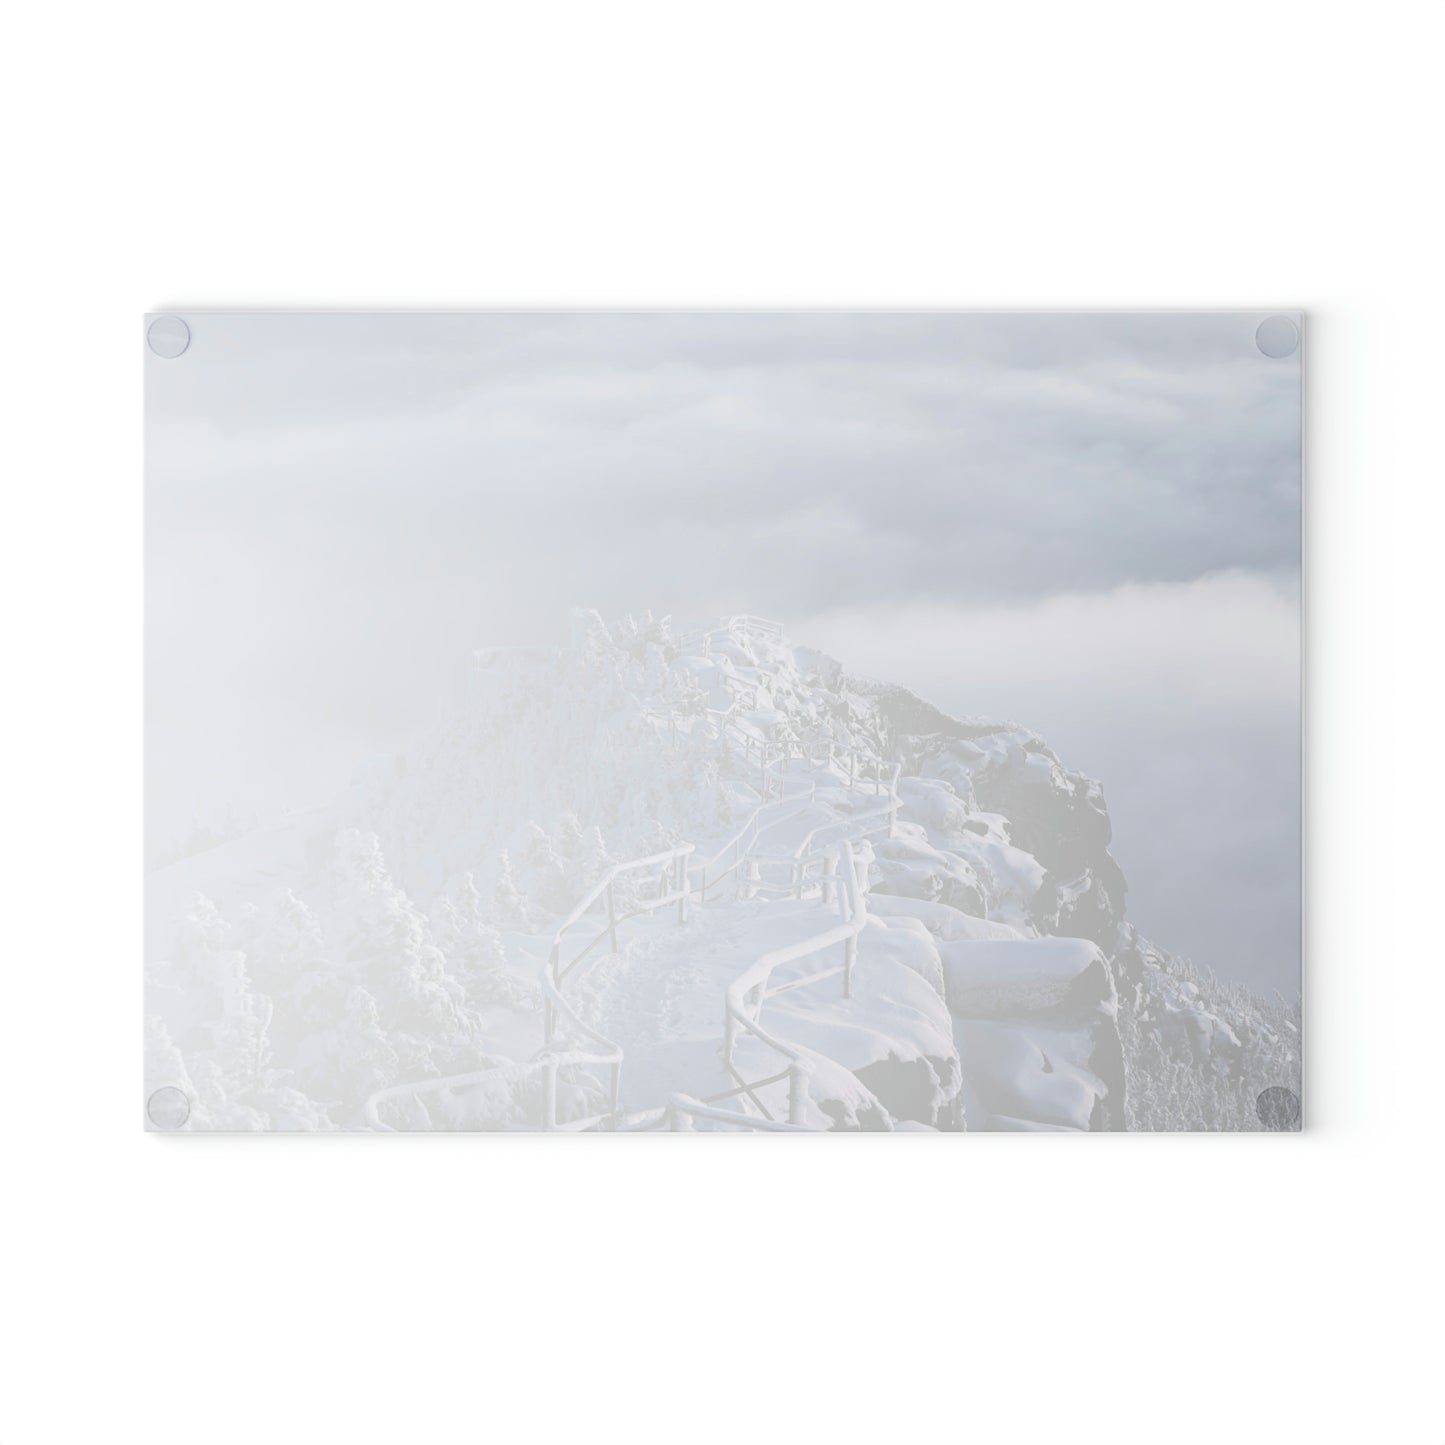 Glass Cutting Board - Whiteface Castle in the Clouds